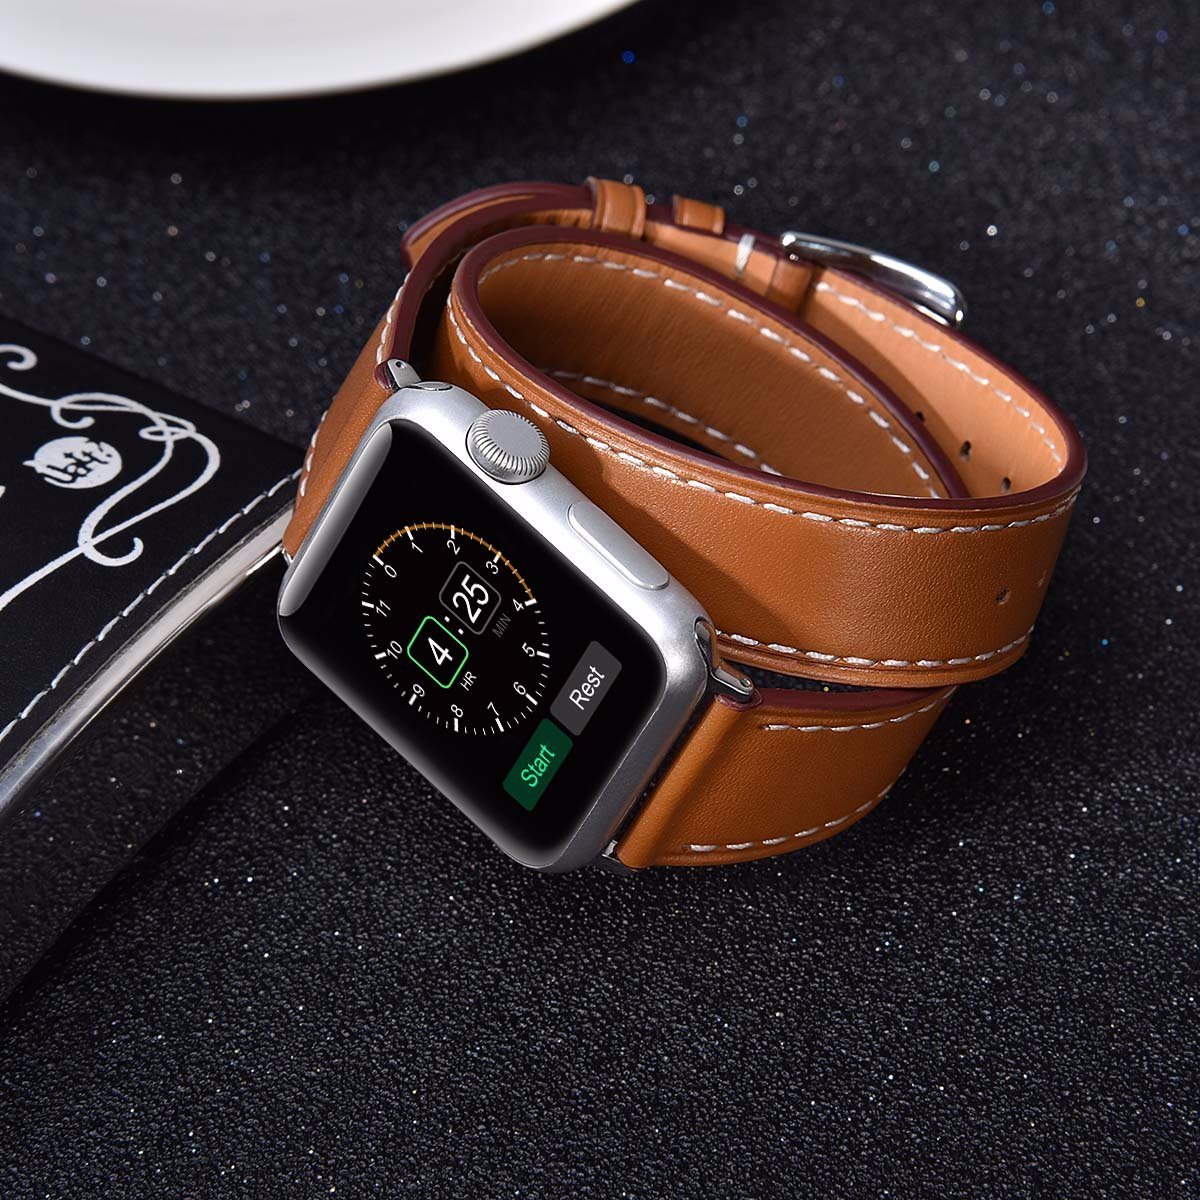 Speidel 42mm Light Brown Luxury Watchband with Black AdaptersBuckle and Case Protective Cover for Smart Watch